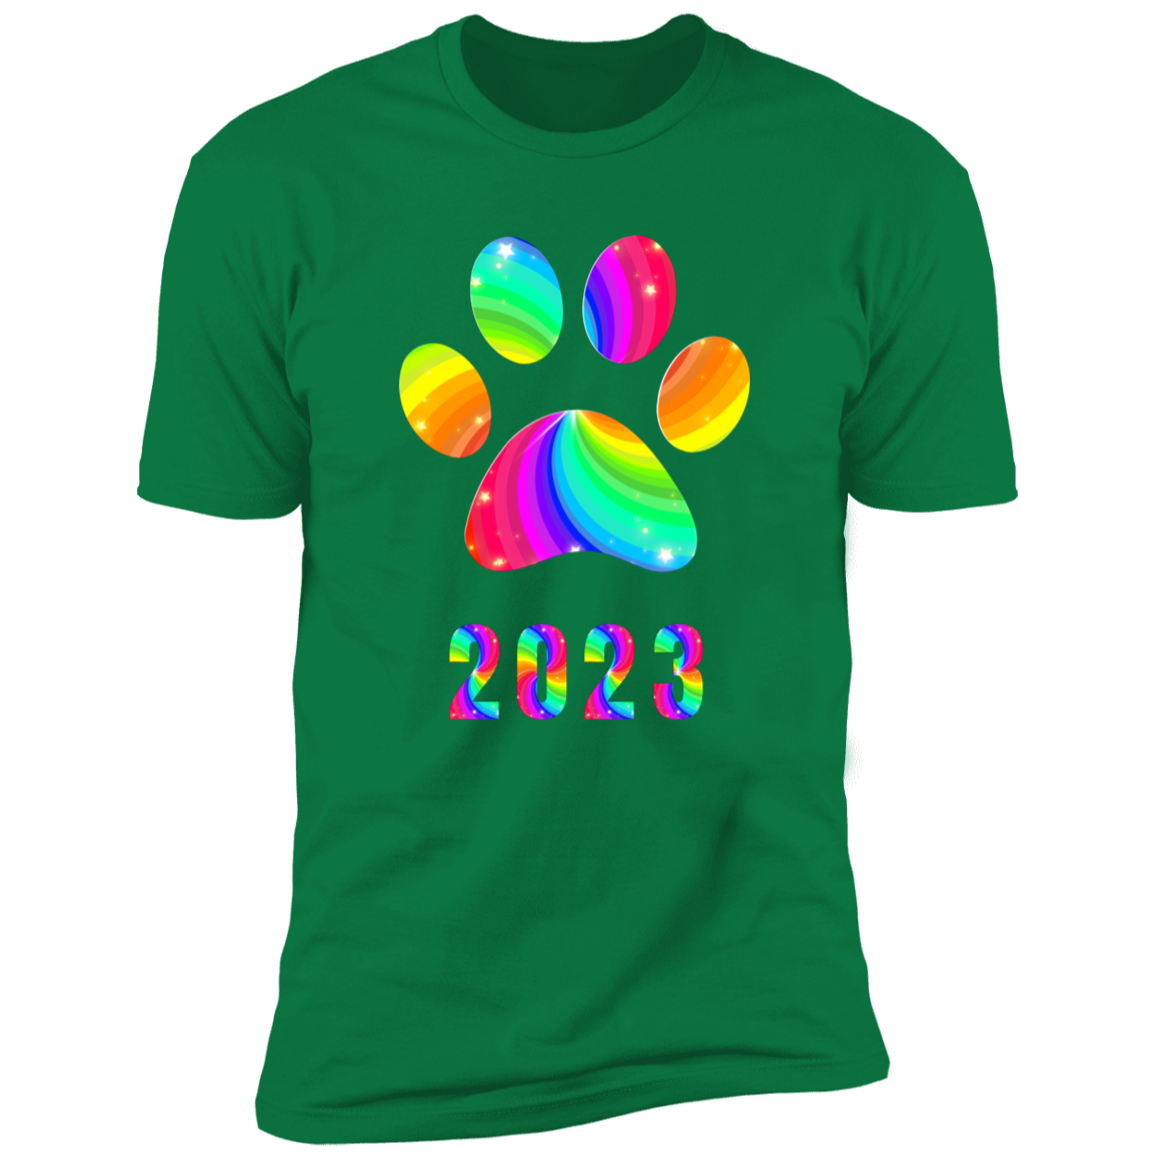 Pride Paw 2023 (Swirl) Pride T-shirt, Paw Pride Dog Shirt for humans, in kelly green